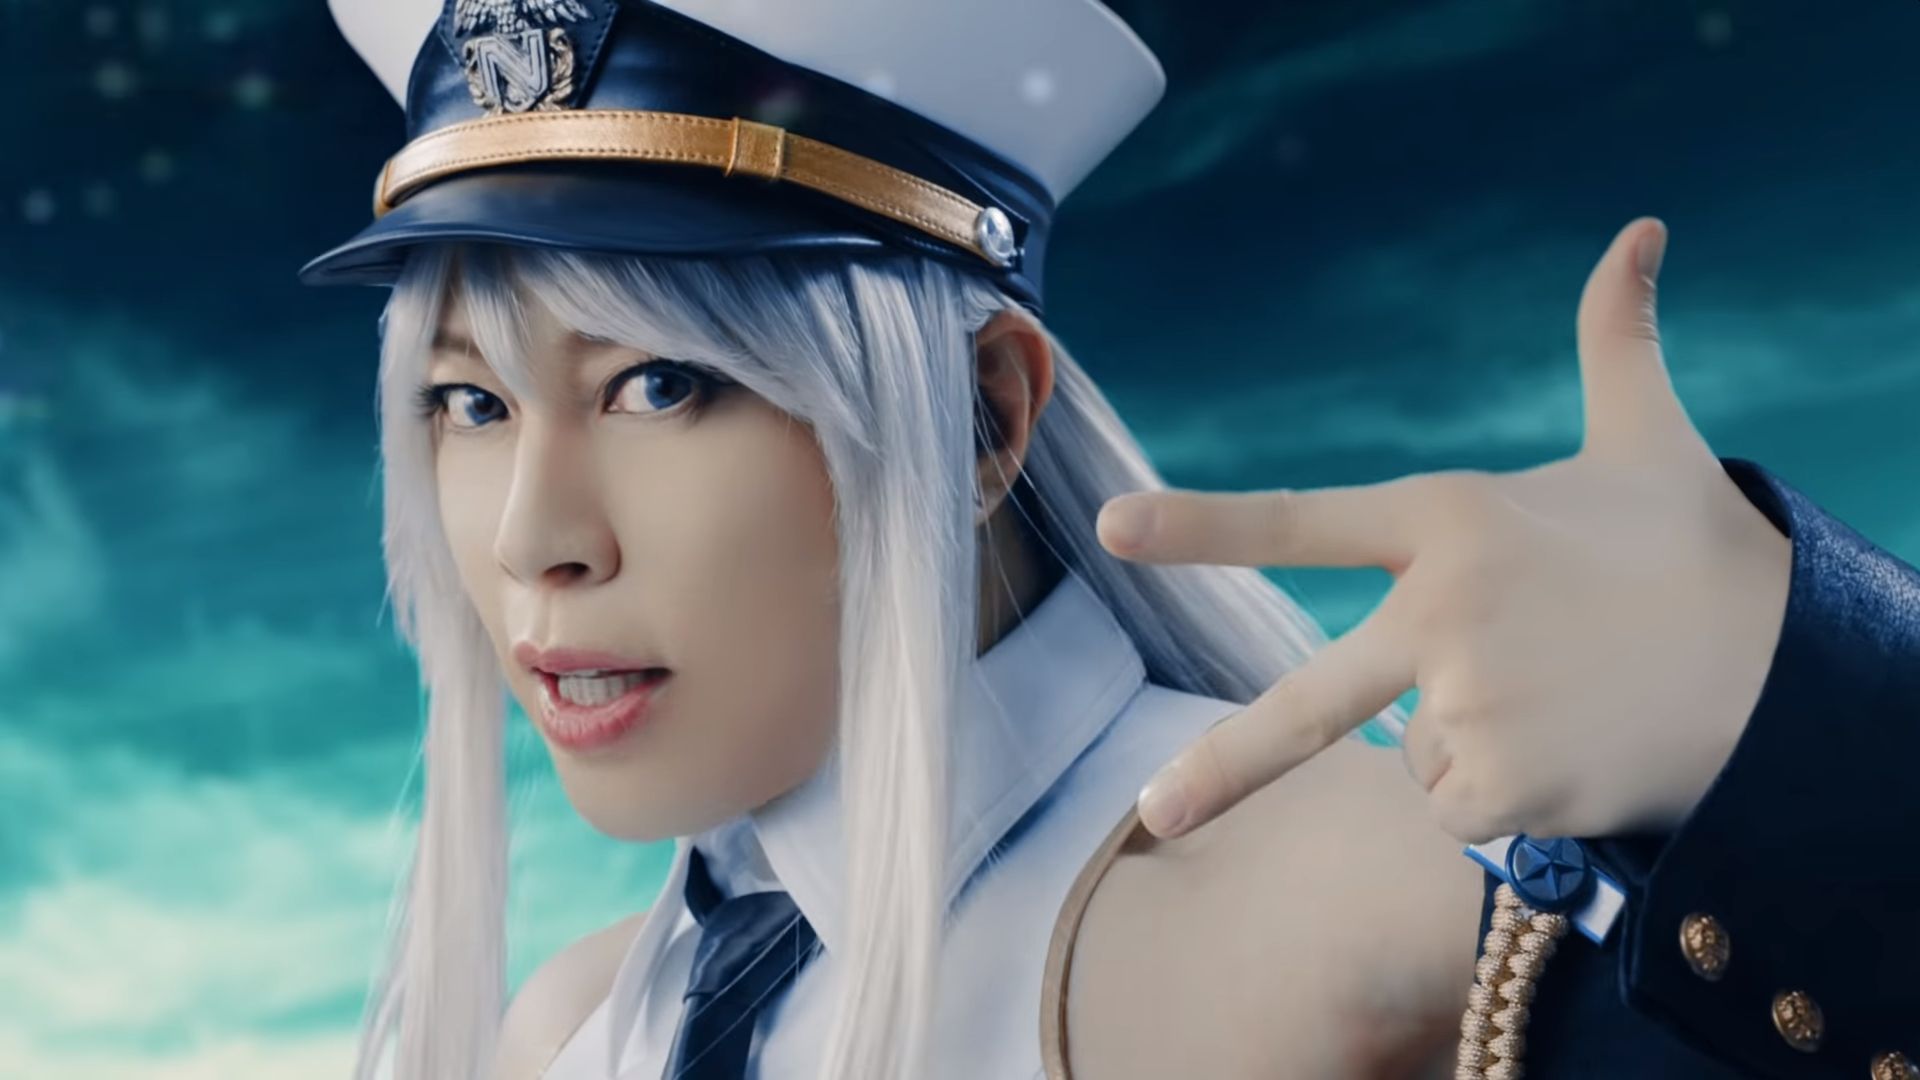 Azur Lane Rocks With Music Video by T.M.Revolution; New Anime Announced